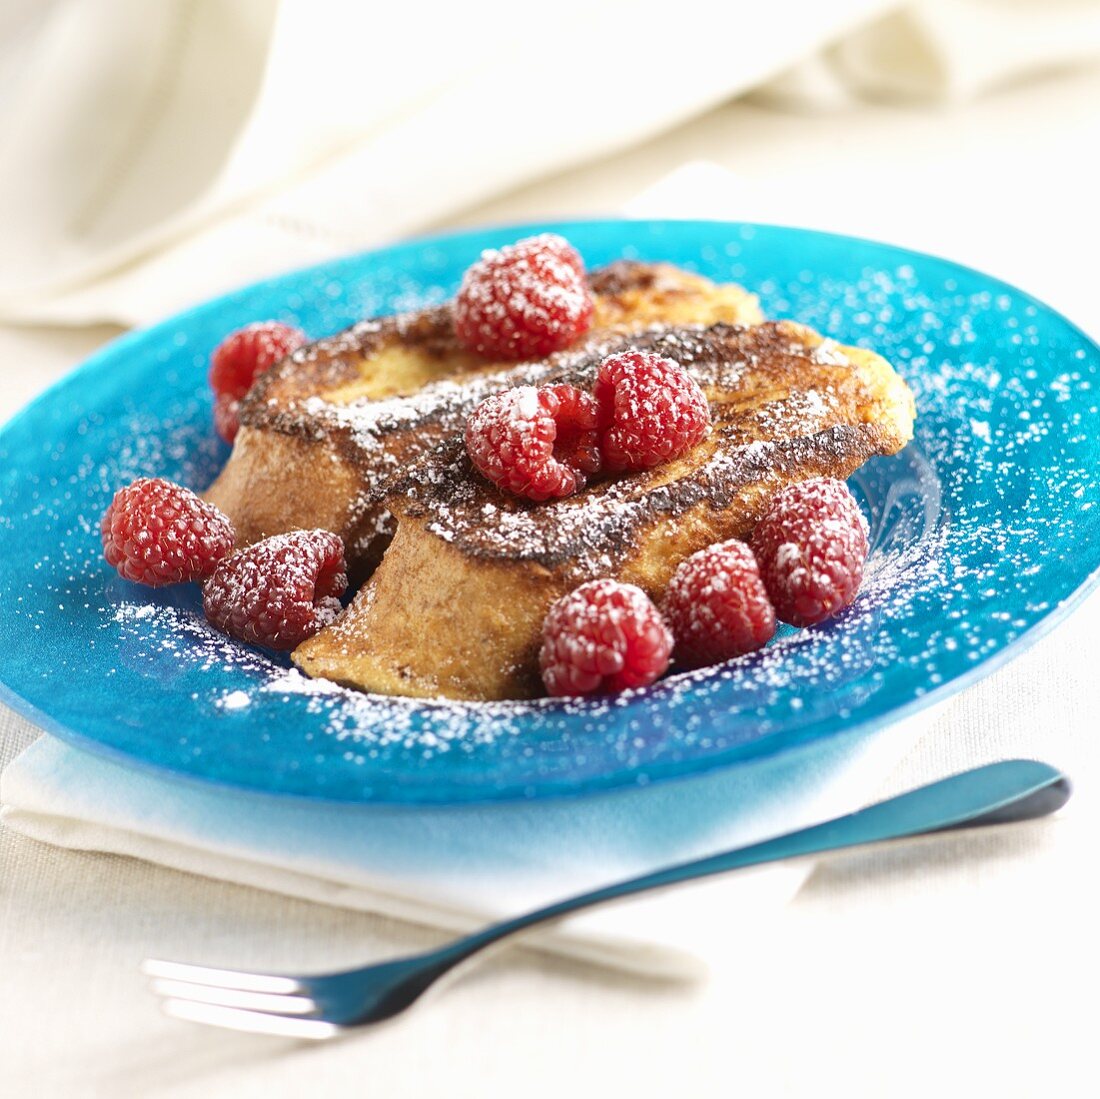 French Toast with Raspberries and Powdered Sugar